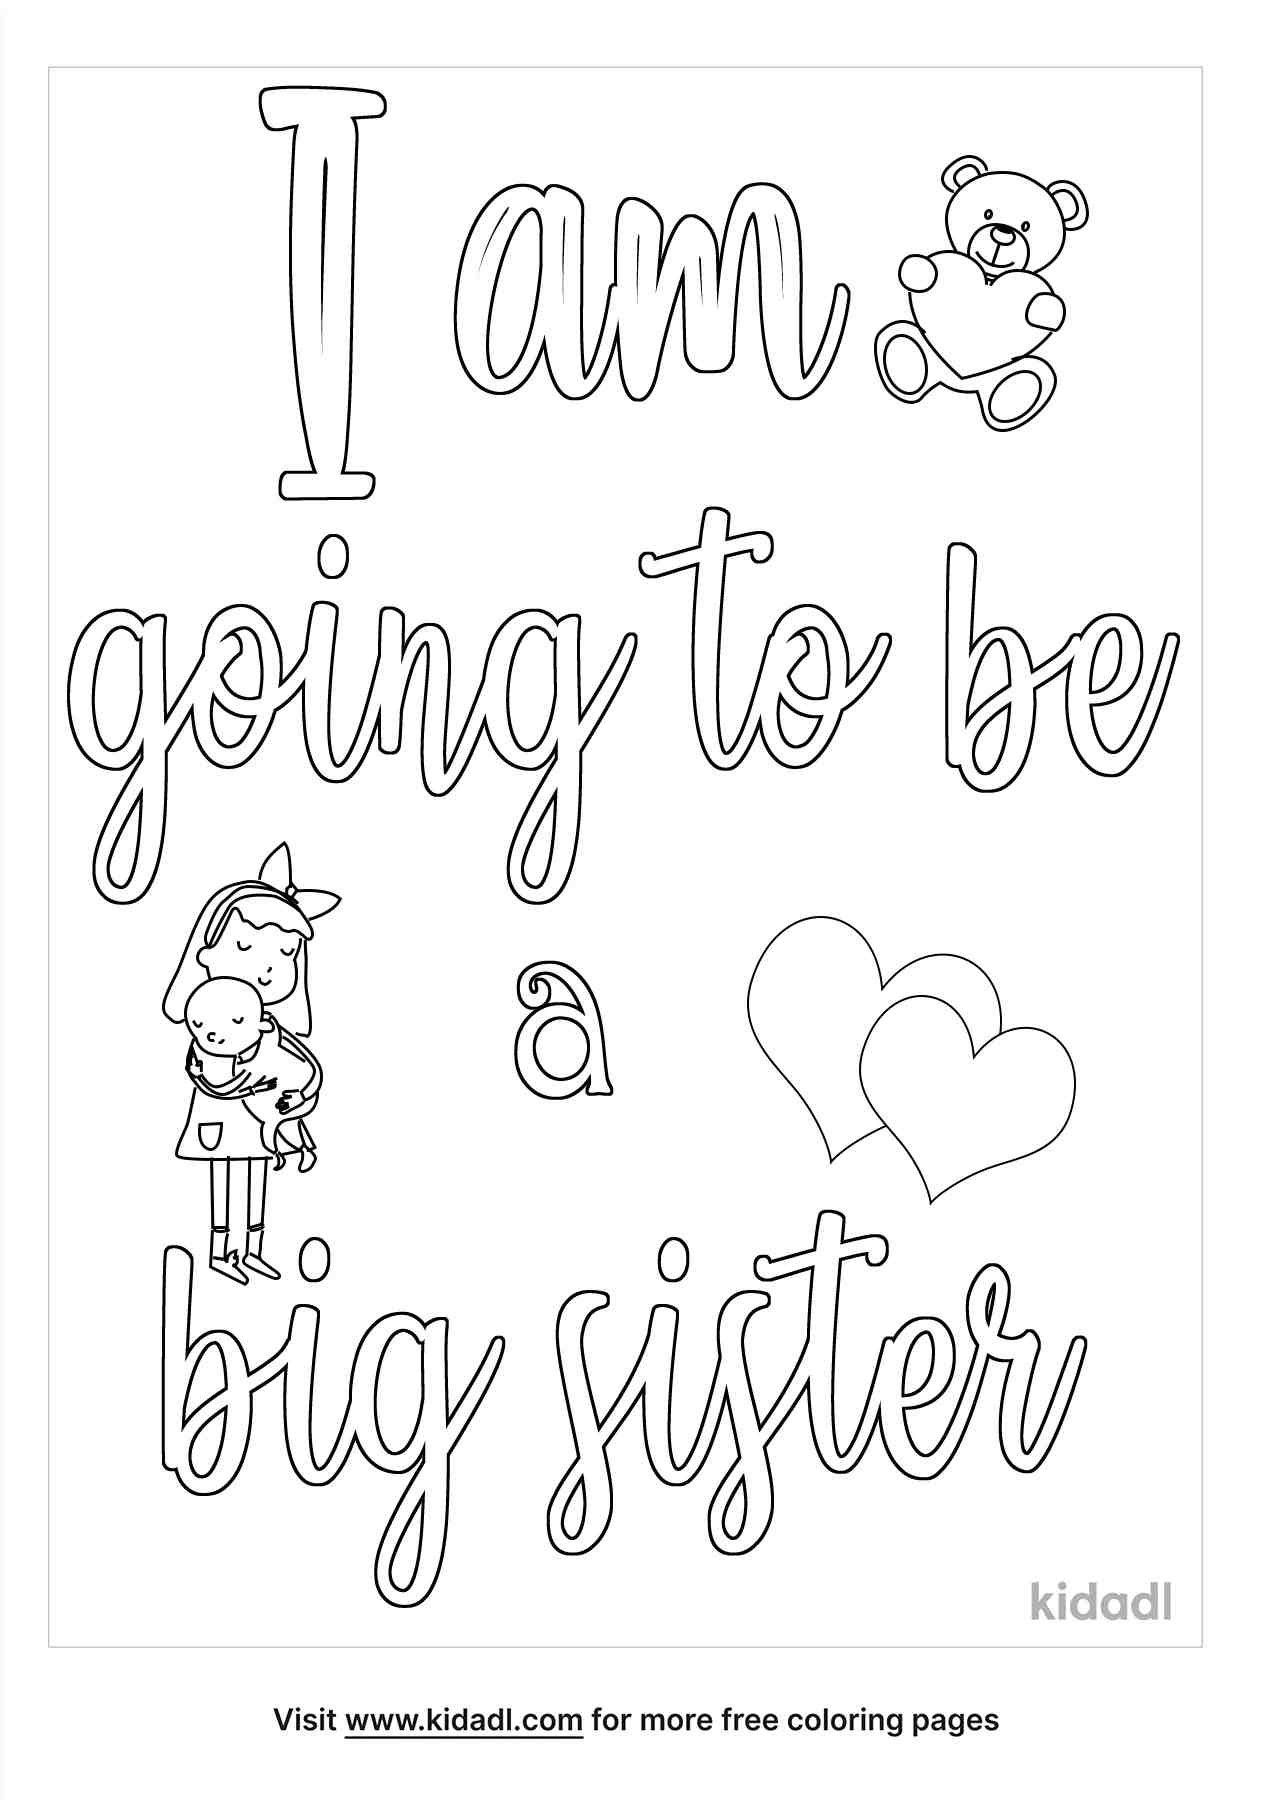 Coloring page that contains big sister